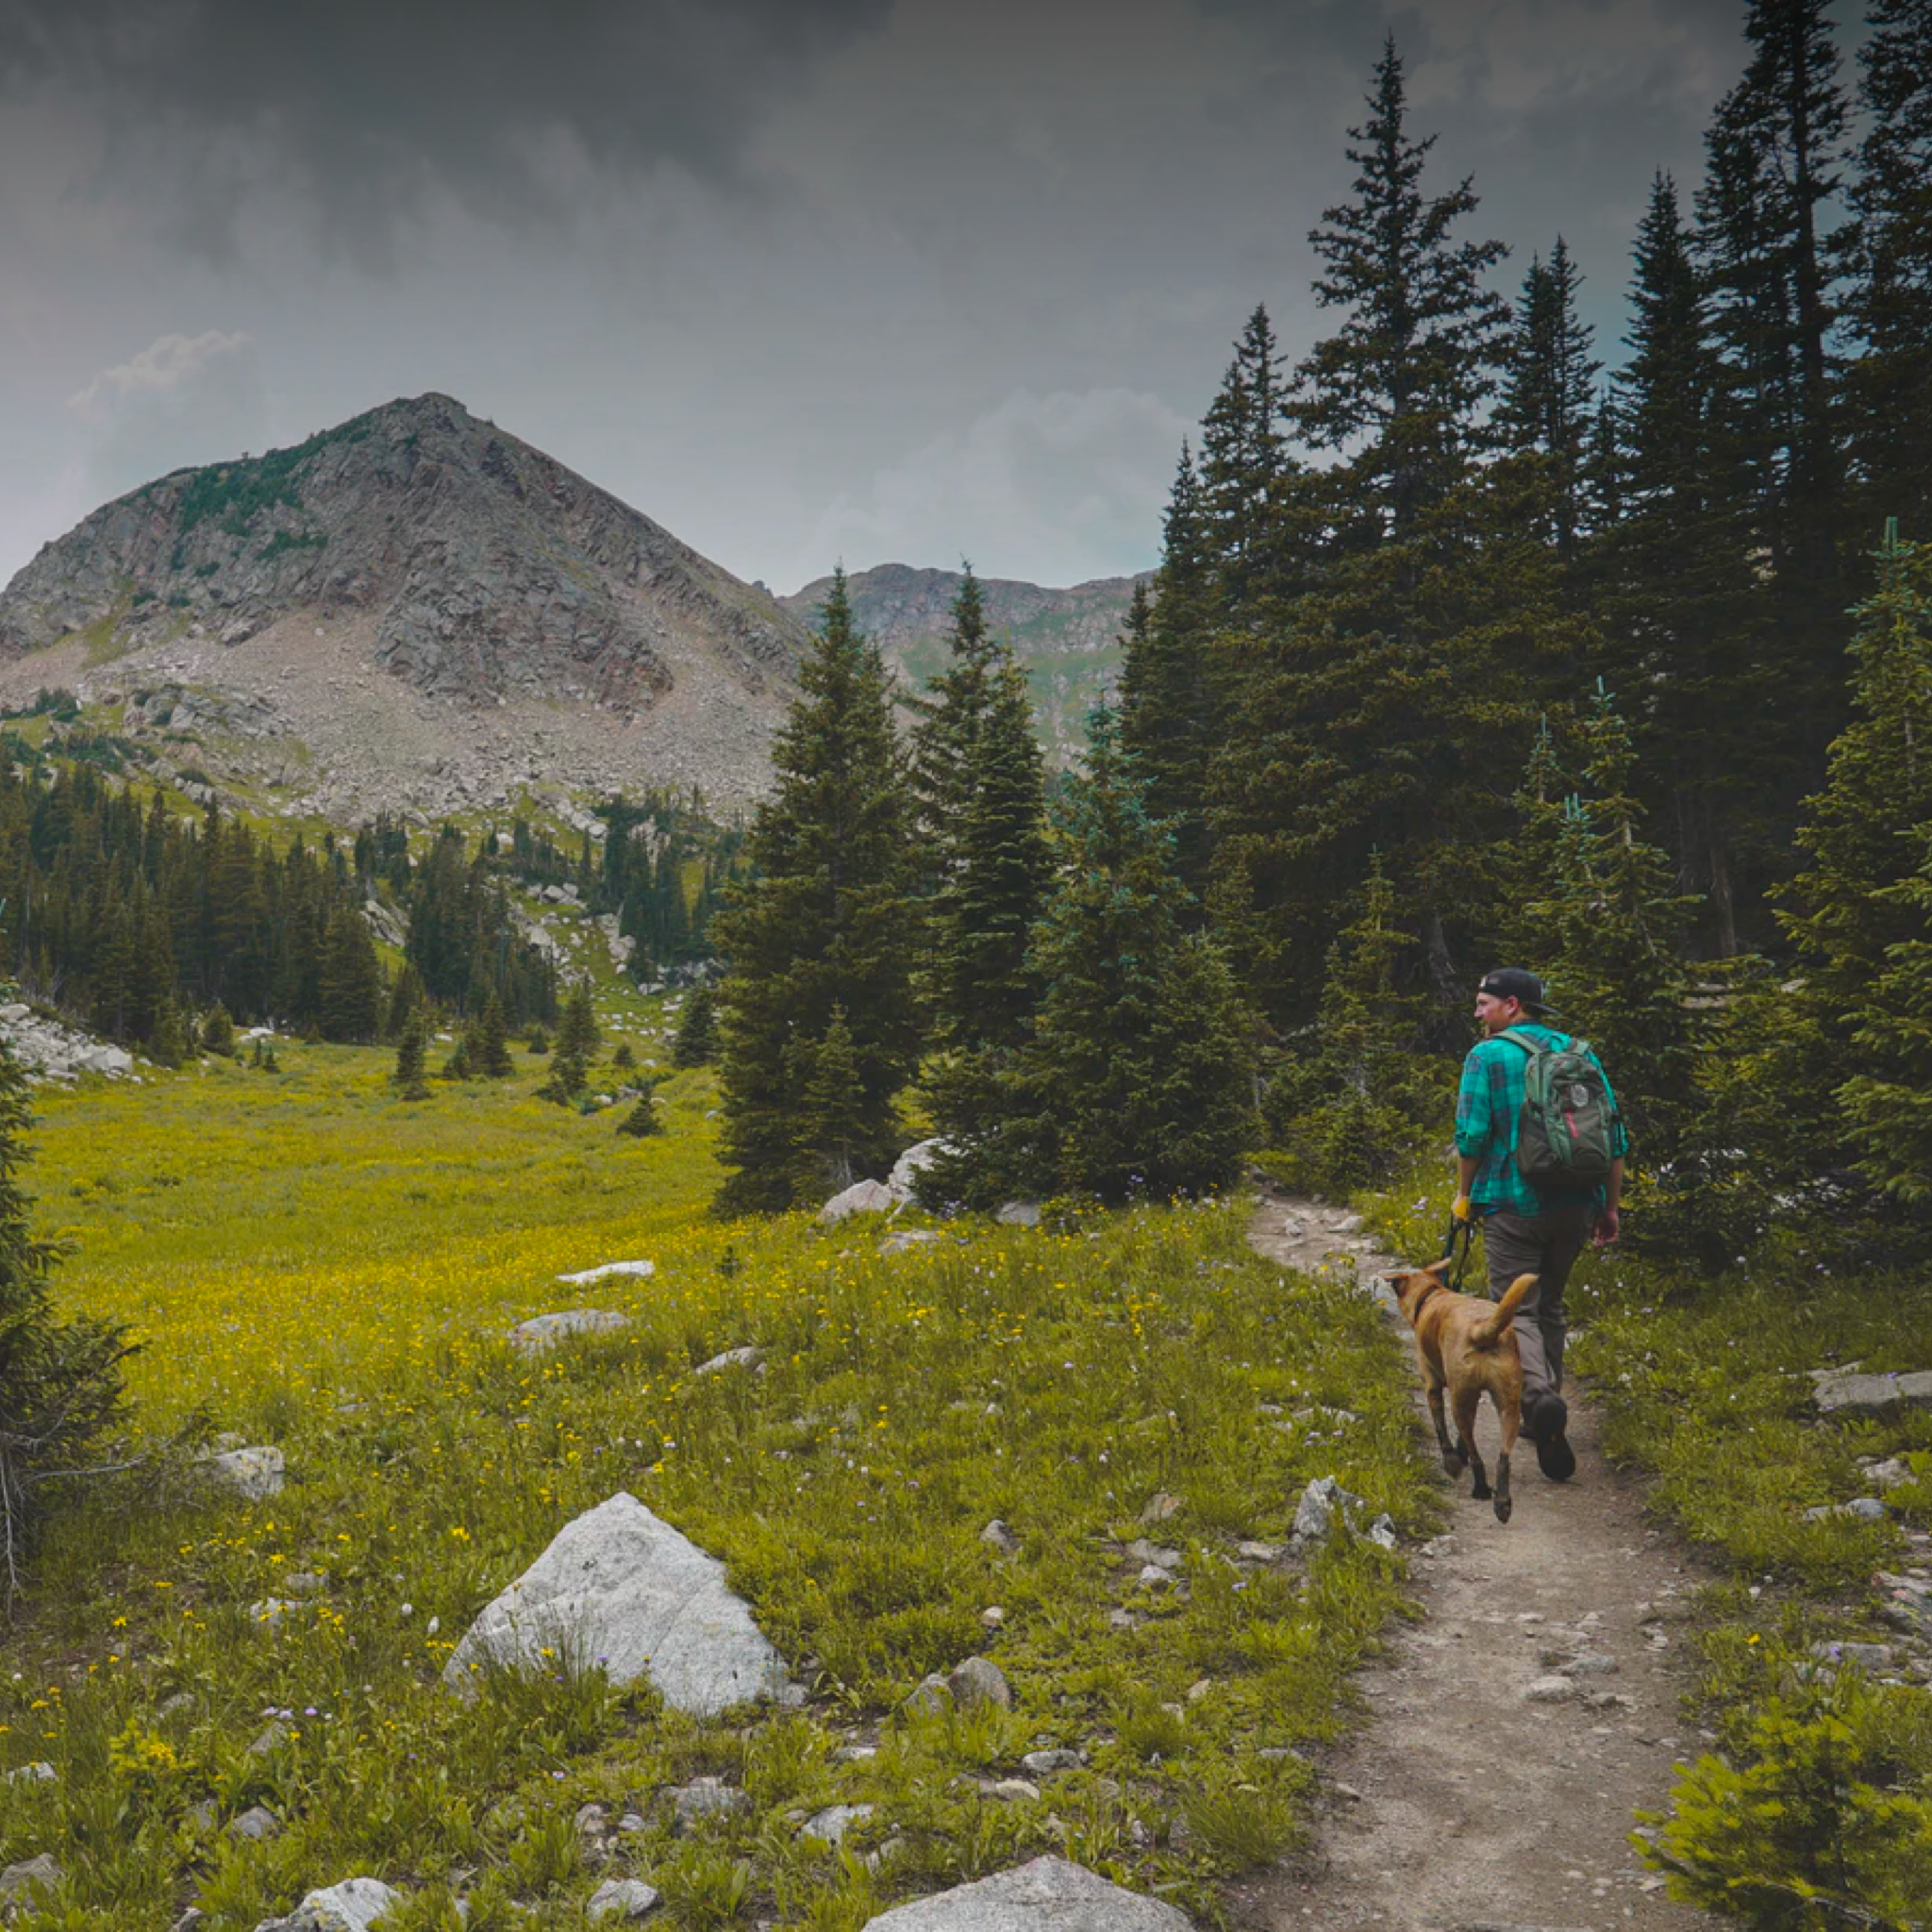 A man hikes along a trail in the mountains with his dog by his side.